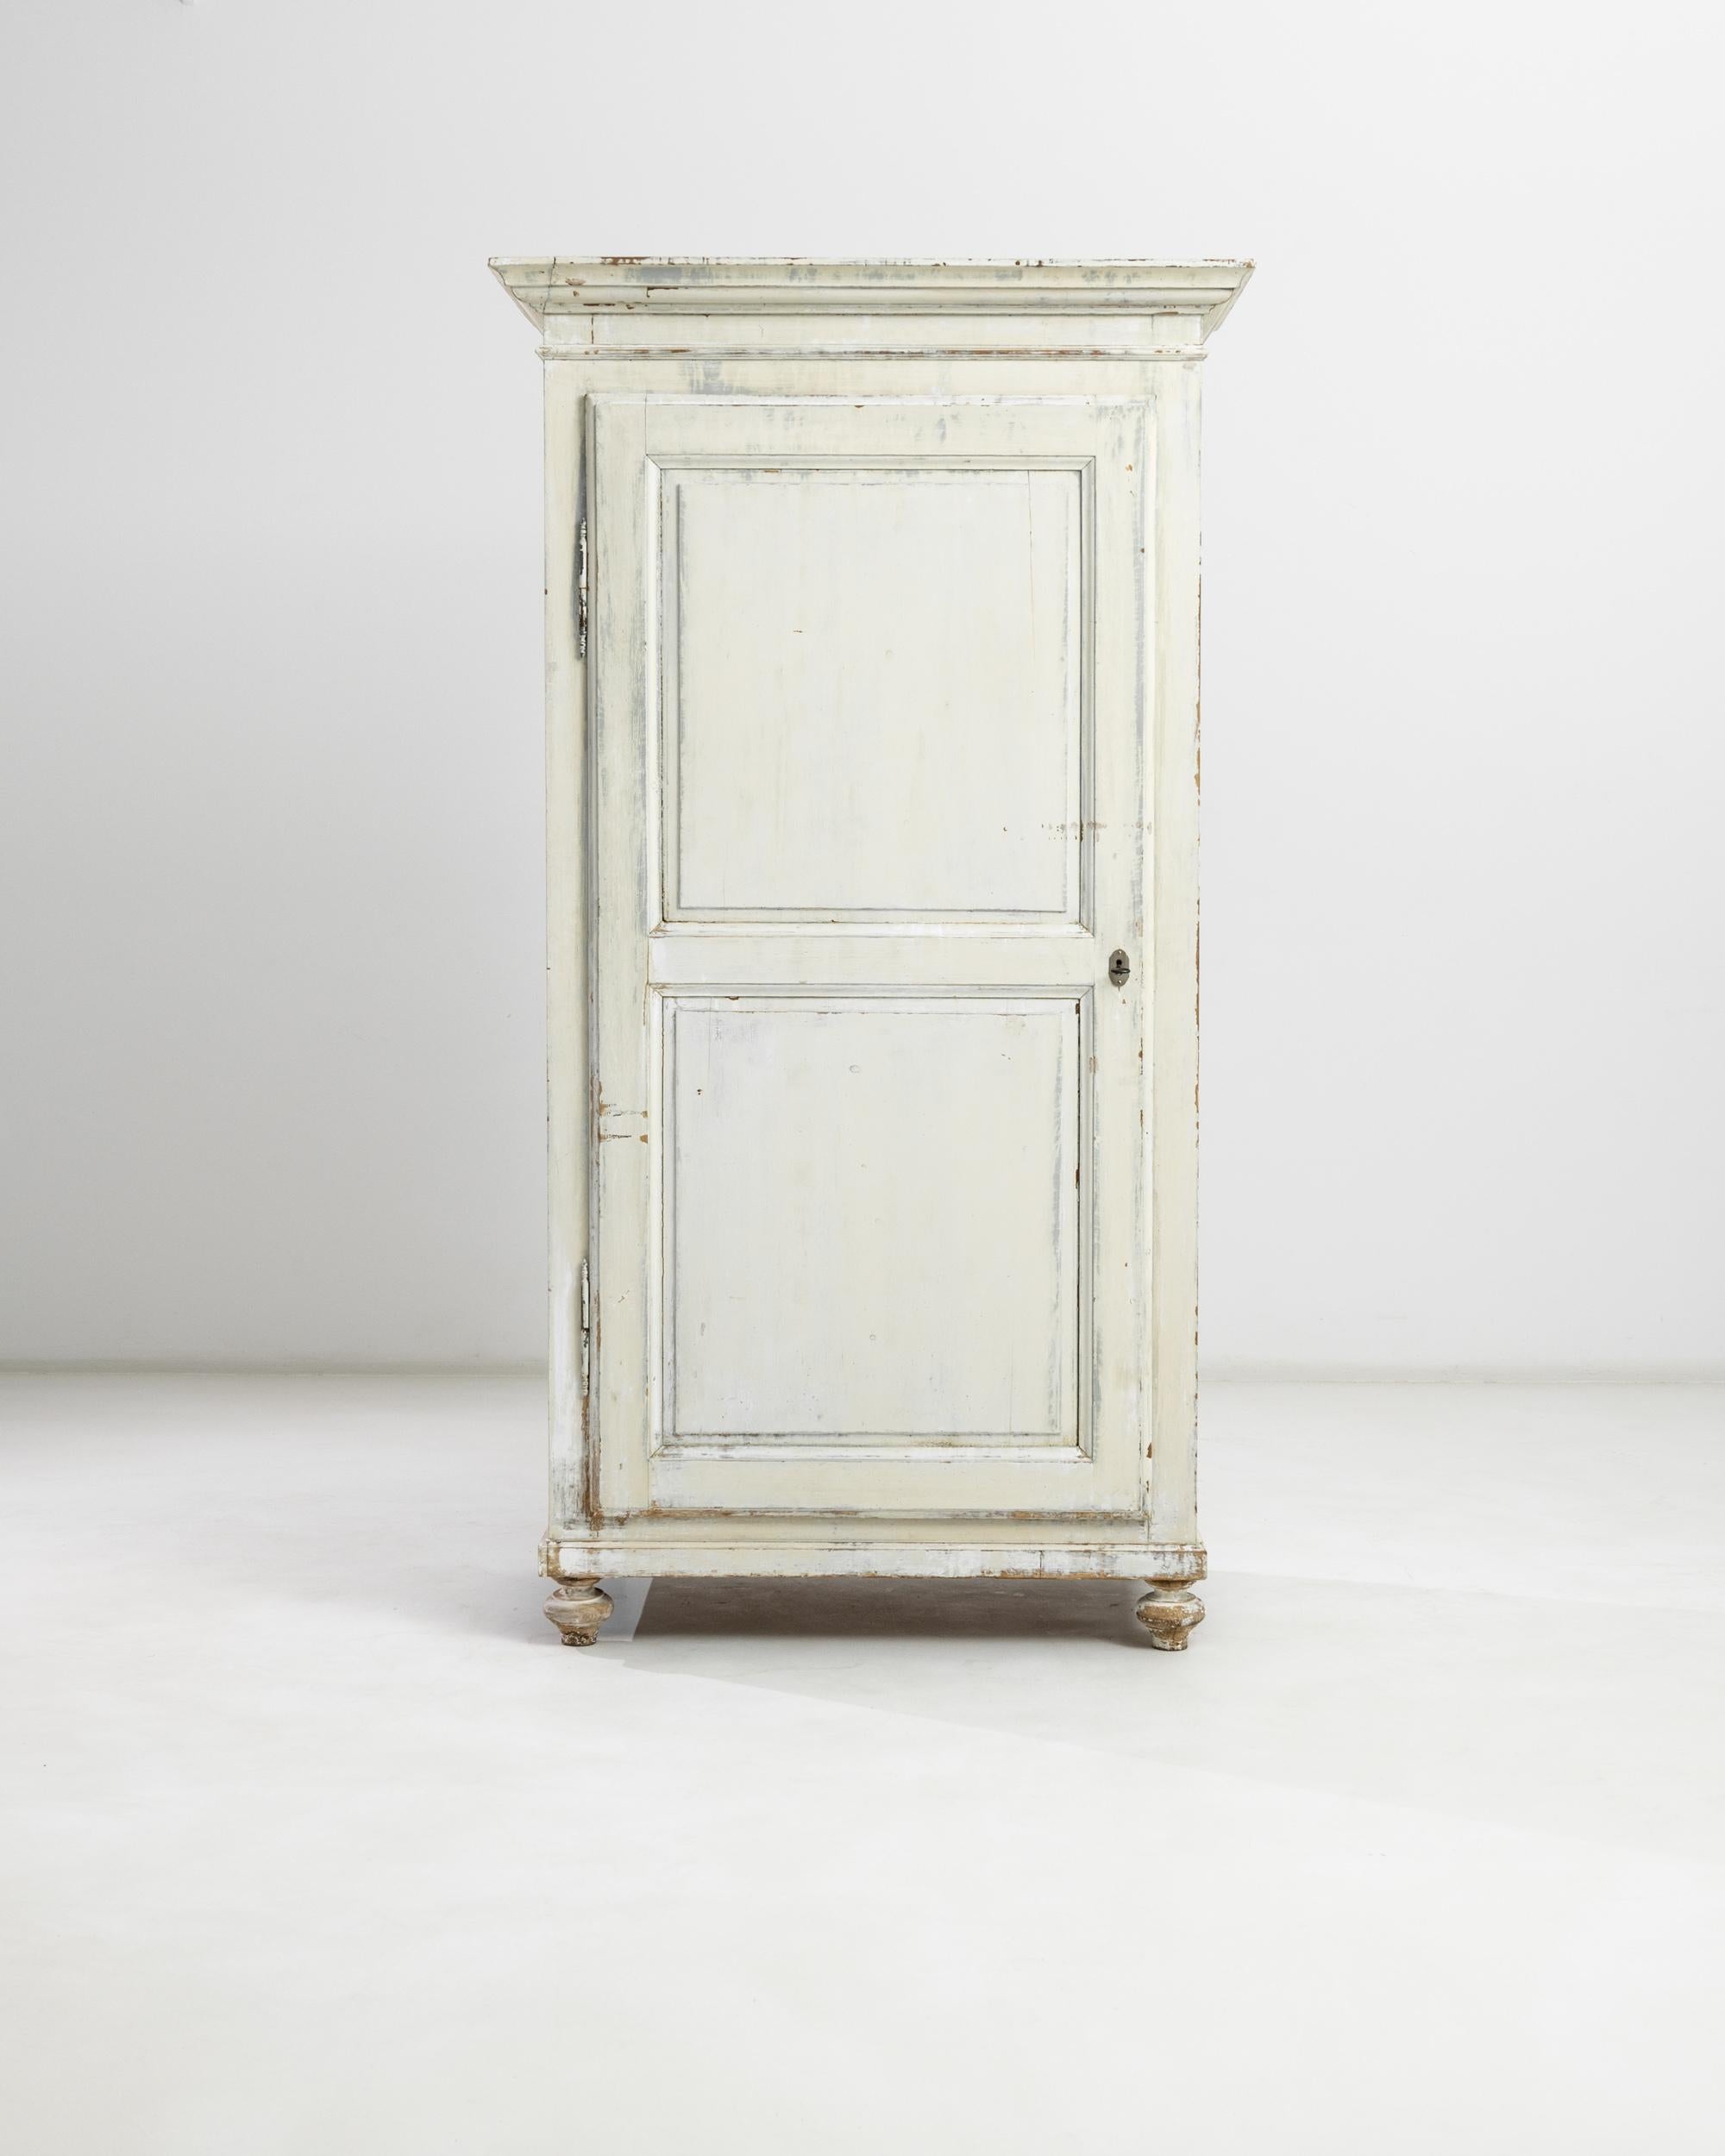 Sedate yet spirited, this charmful wooden cabinet from turn of the century France adds a romantic note to a space. A cyma recta molded cornice sits atop an upright case, elevated upon turnip feet. The picturesque silhouette is accentuated by the